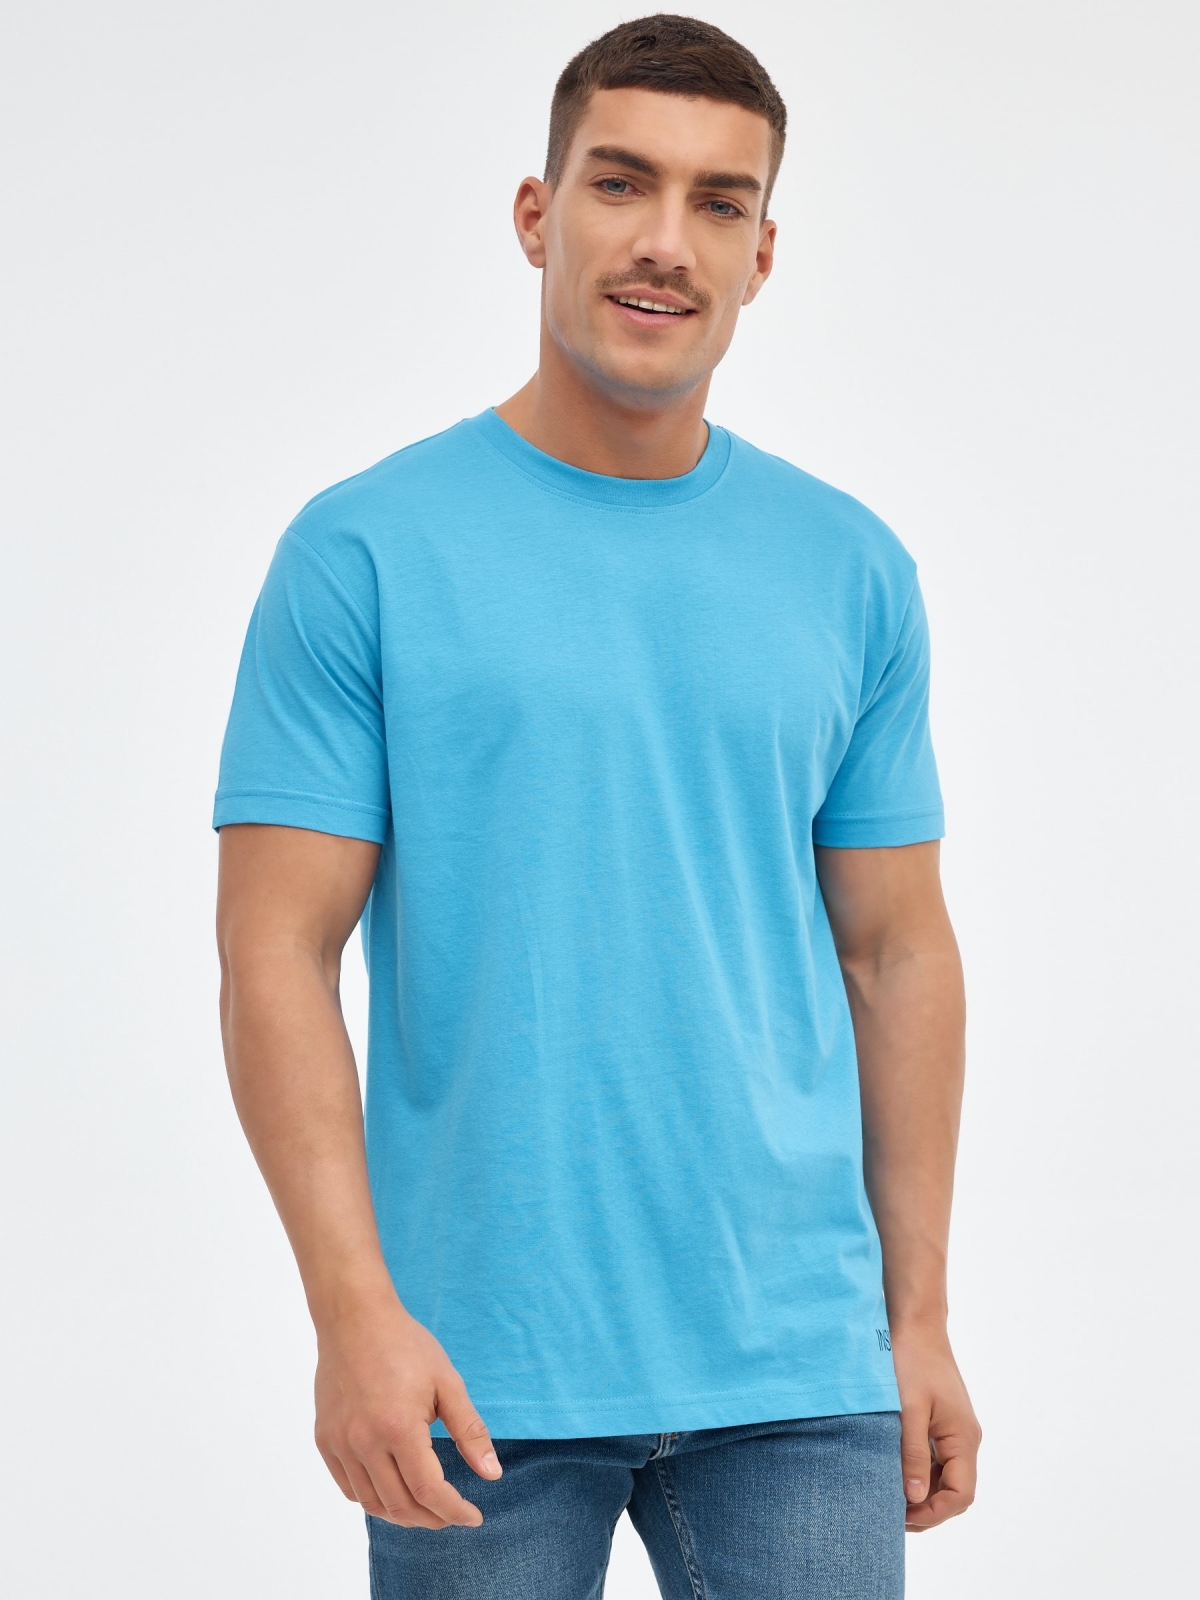 Basic short sleeve t-shirt light blue middle front view